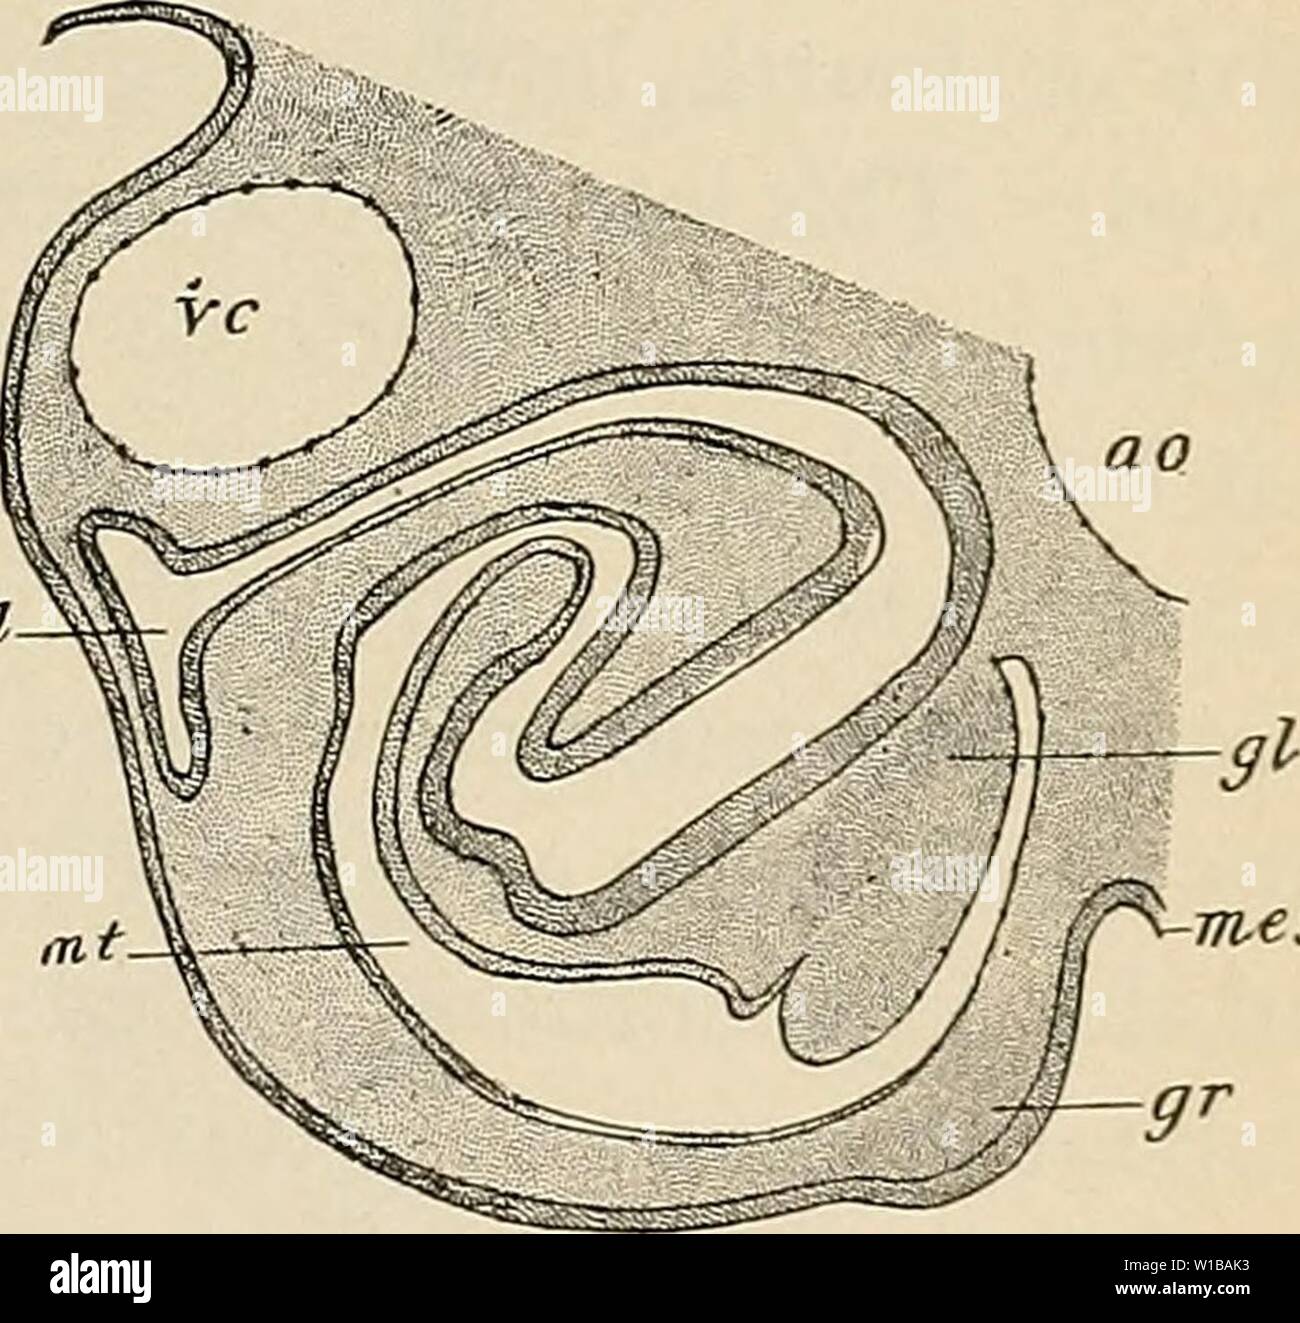 Archive image from page 352 of The development of the human. The development of the human body : a manual of human embryology . developmentofhum00mcmu Year: 1914  THE MESONEPHROS 341 glomeruli, such as occur in connection with the mesonephric tubules do not occur in the pronephros of the human embryo, and this fact, together with the presence of external glomeruli and the participa- tion of the tubules in the formation of the Wolffian duct, serve to distinguish the pronephros from the mesonephros. The pronephric tubules, are, as has been stated, transitory structures and by the time the embryo Stock Photo